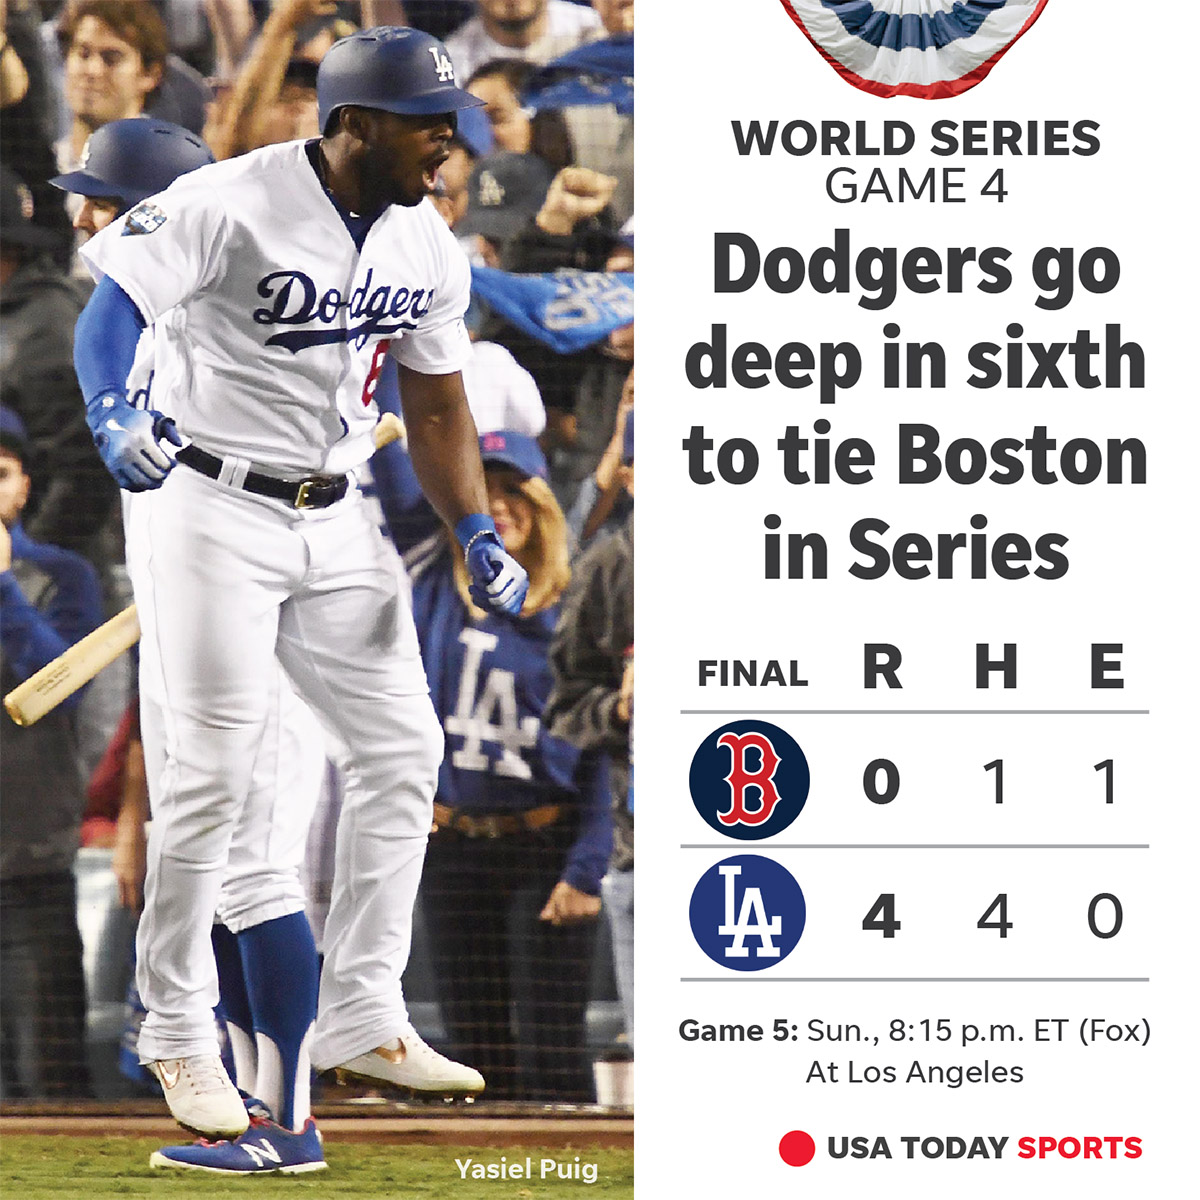 World Series Game 4 results